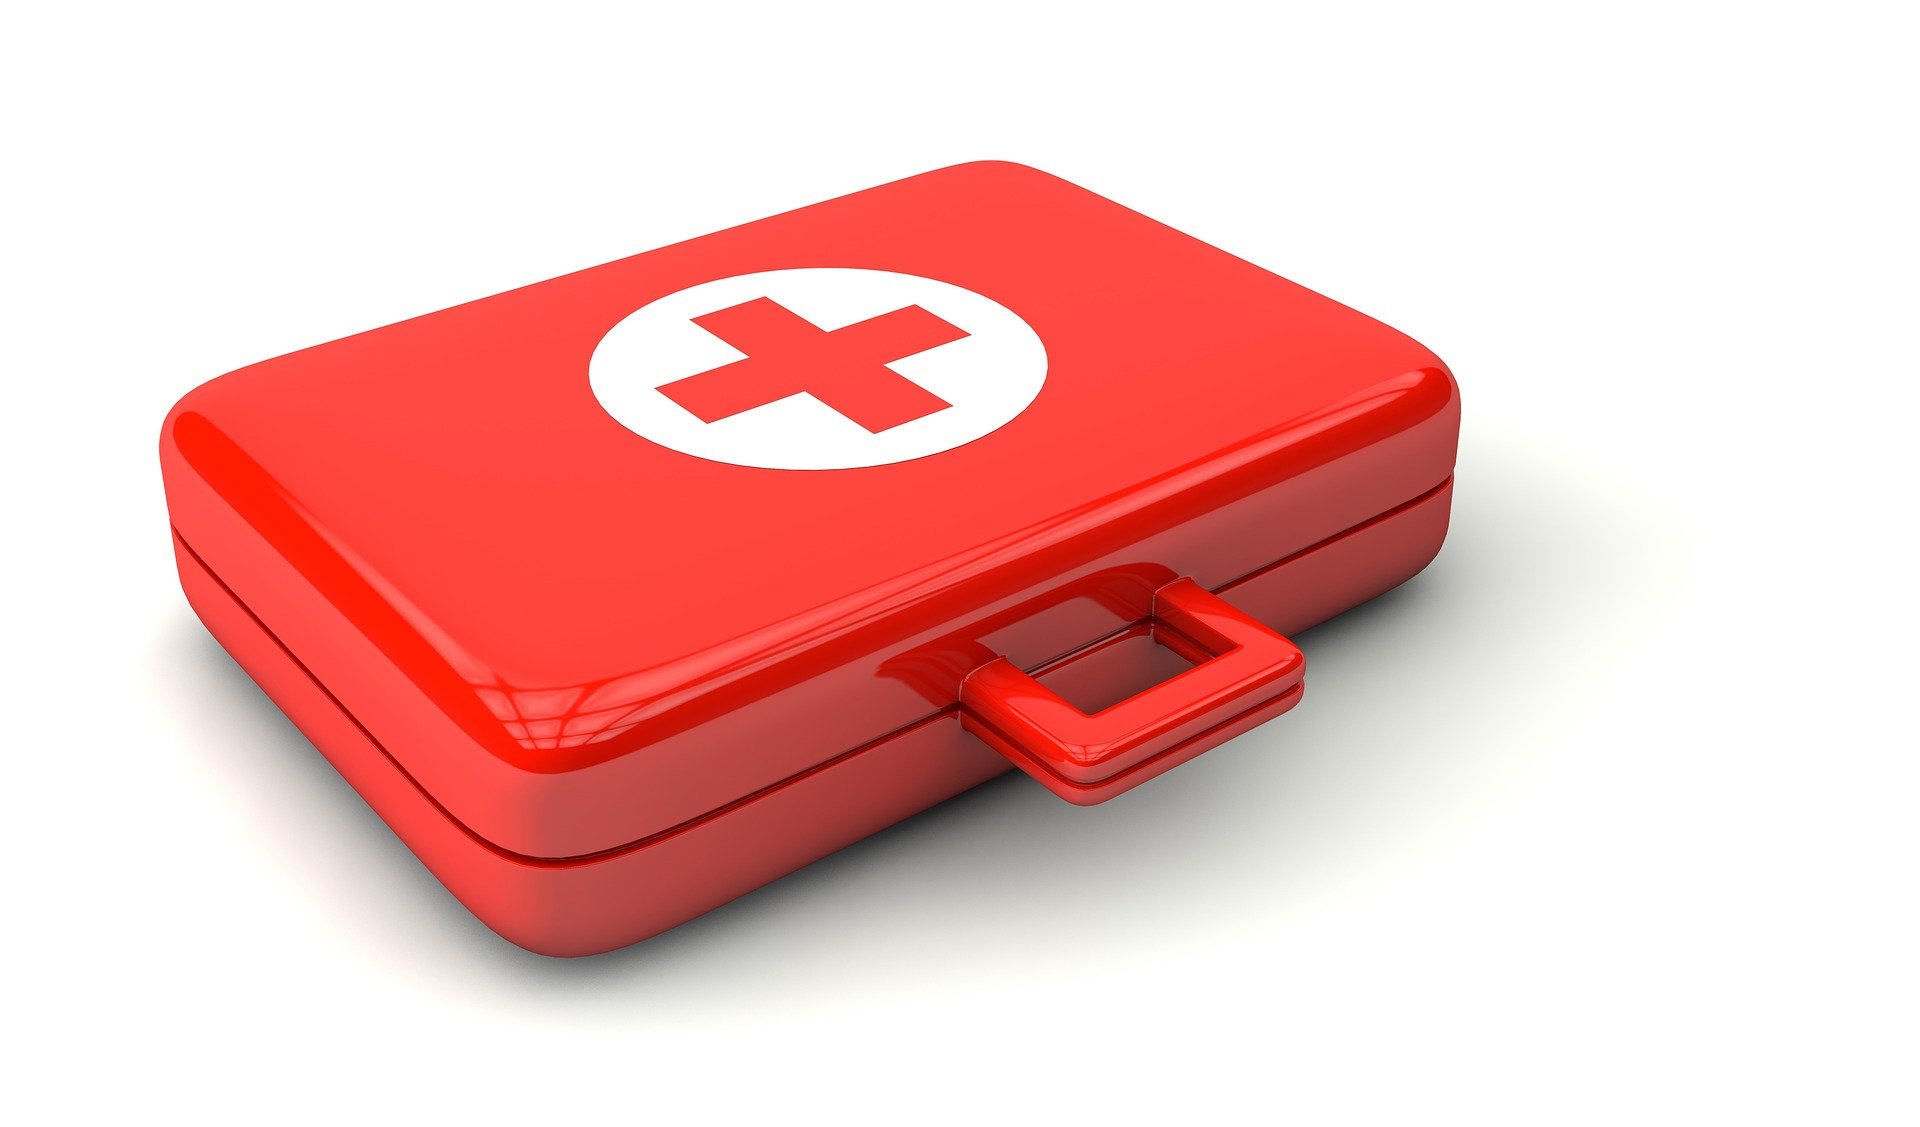 A red first aid kit with the red and white cross on the top, setting on a white background.